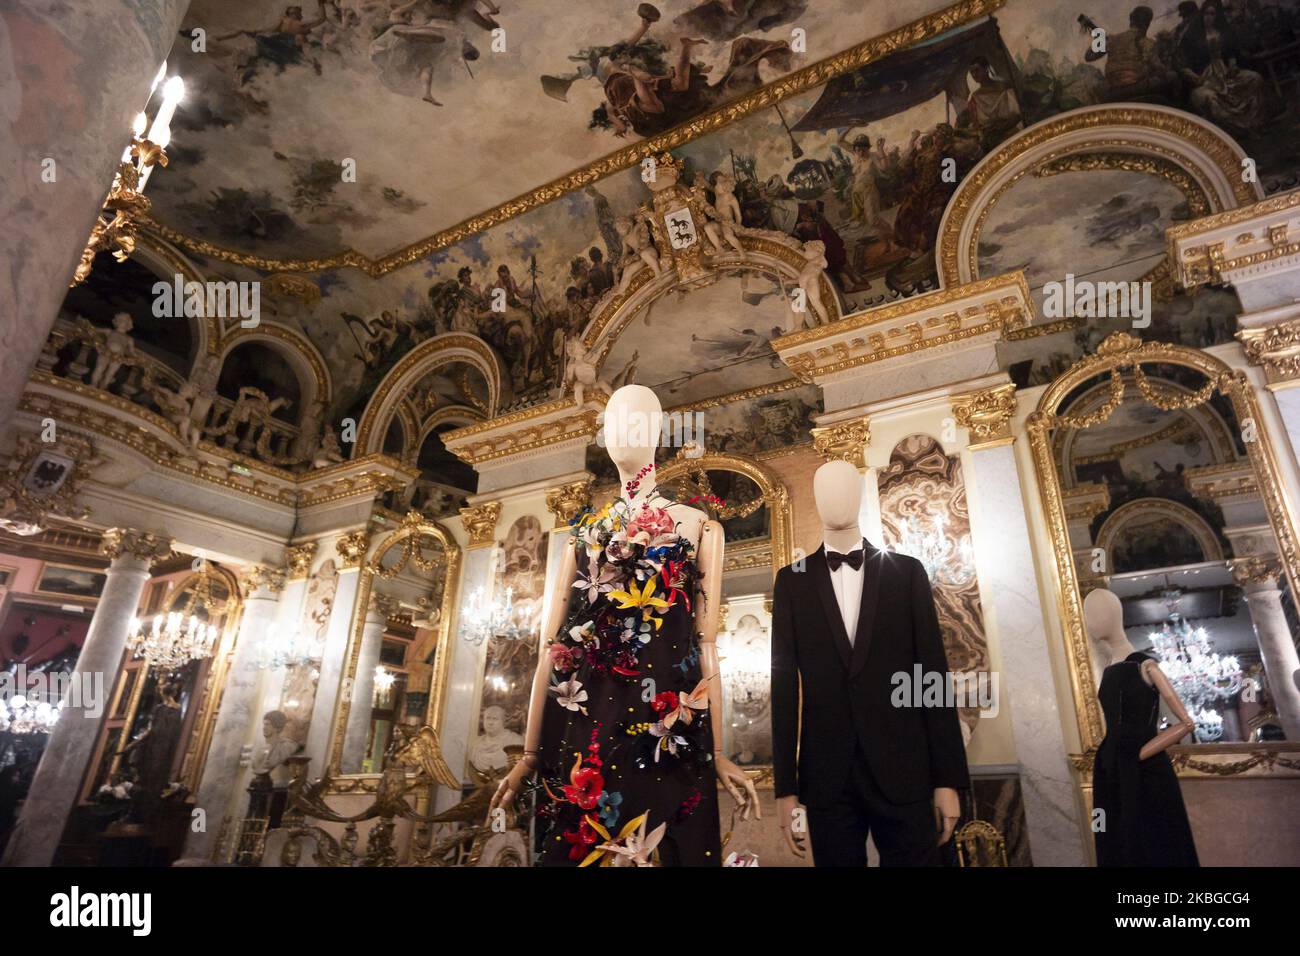 exhibition gala dinner in the palace (cena de gala en el palacio) within the Madrid fashion week, they will meet to recreate a gala dinner in the rooms of the Museum with designs by Roberto Verino, Juan Duyos and Hannibal Laguna in the Cerralbo museum in Madrid. February 6, 2020 Spain (Photo by Oscar Gonzalez/NurPhoto) Stock Photo